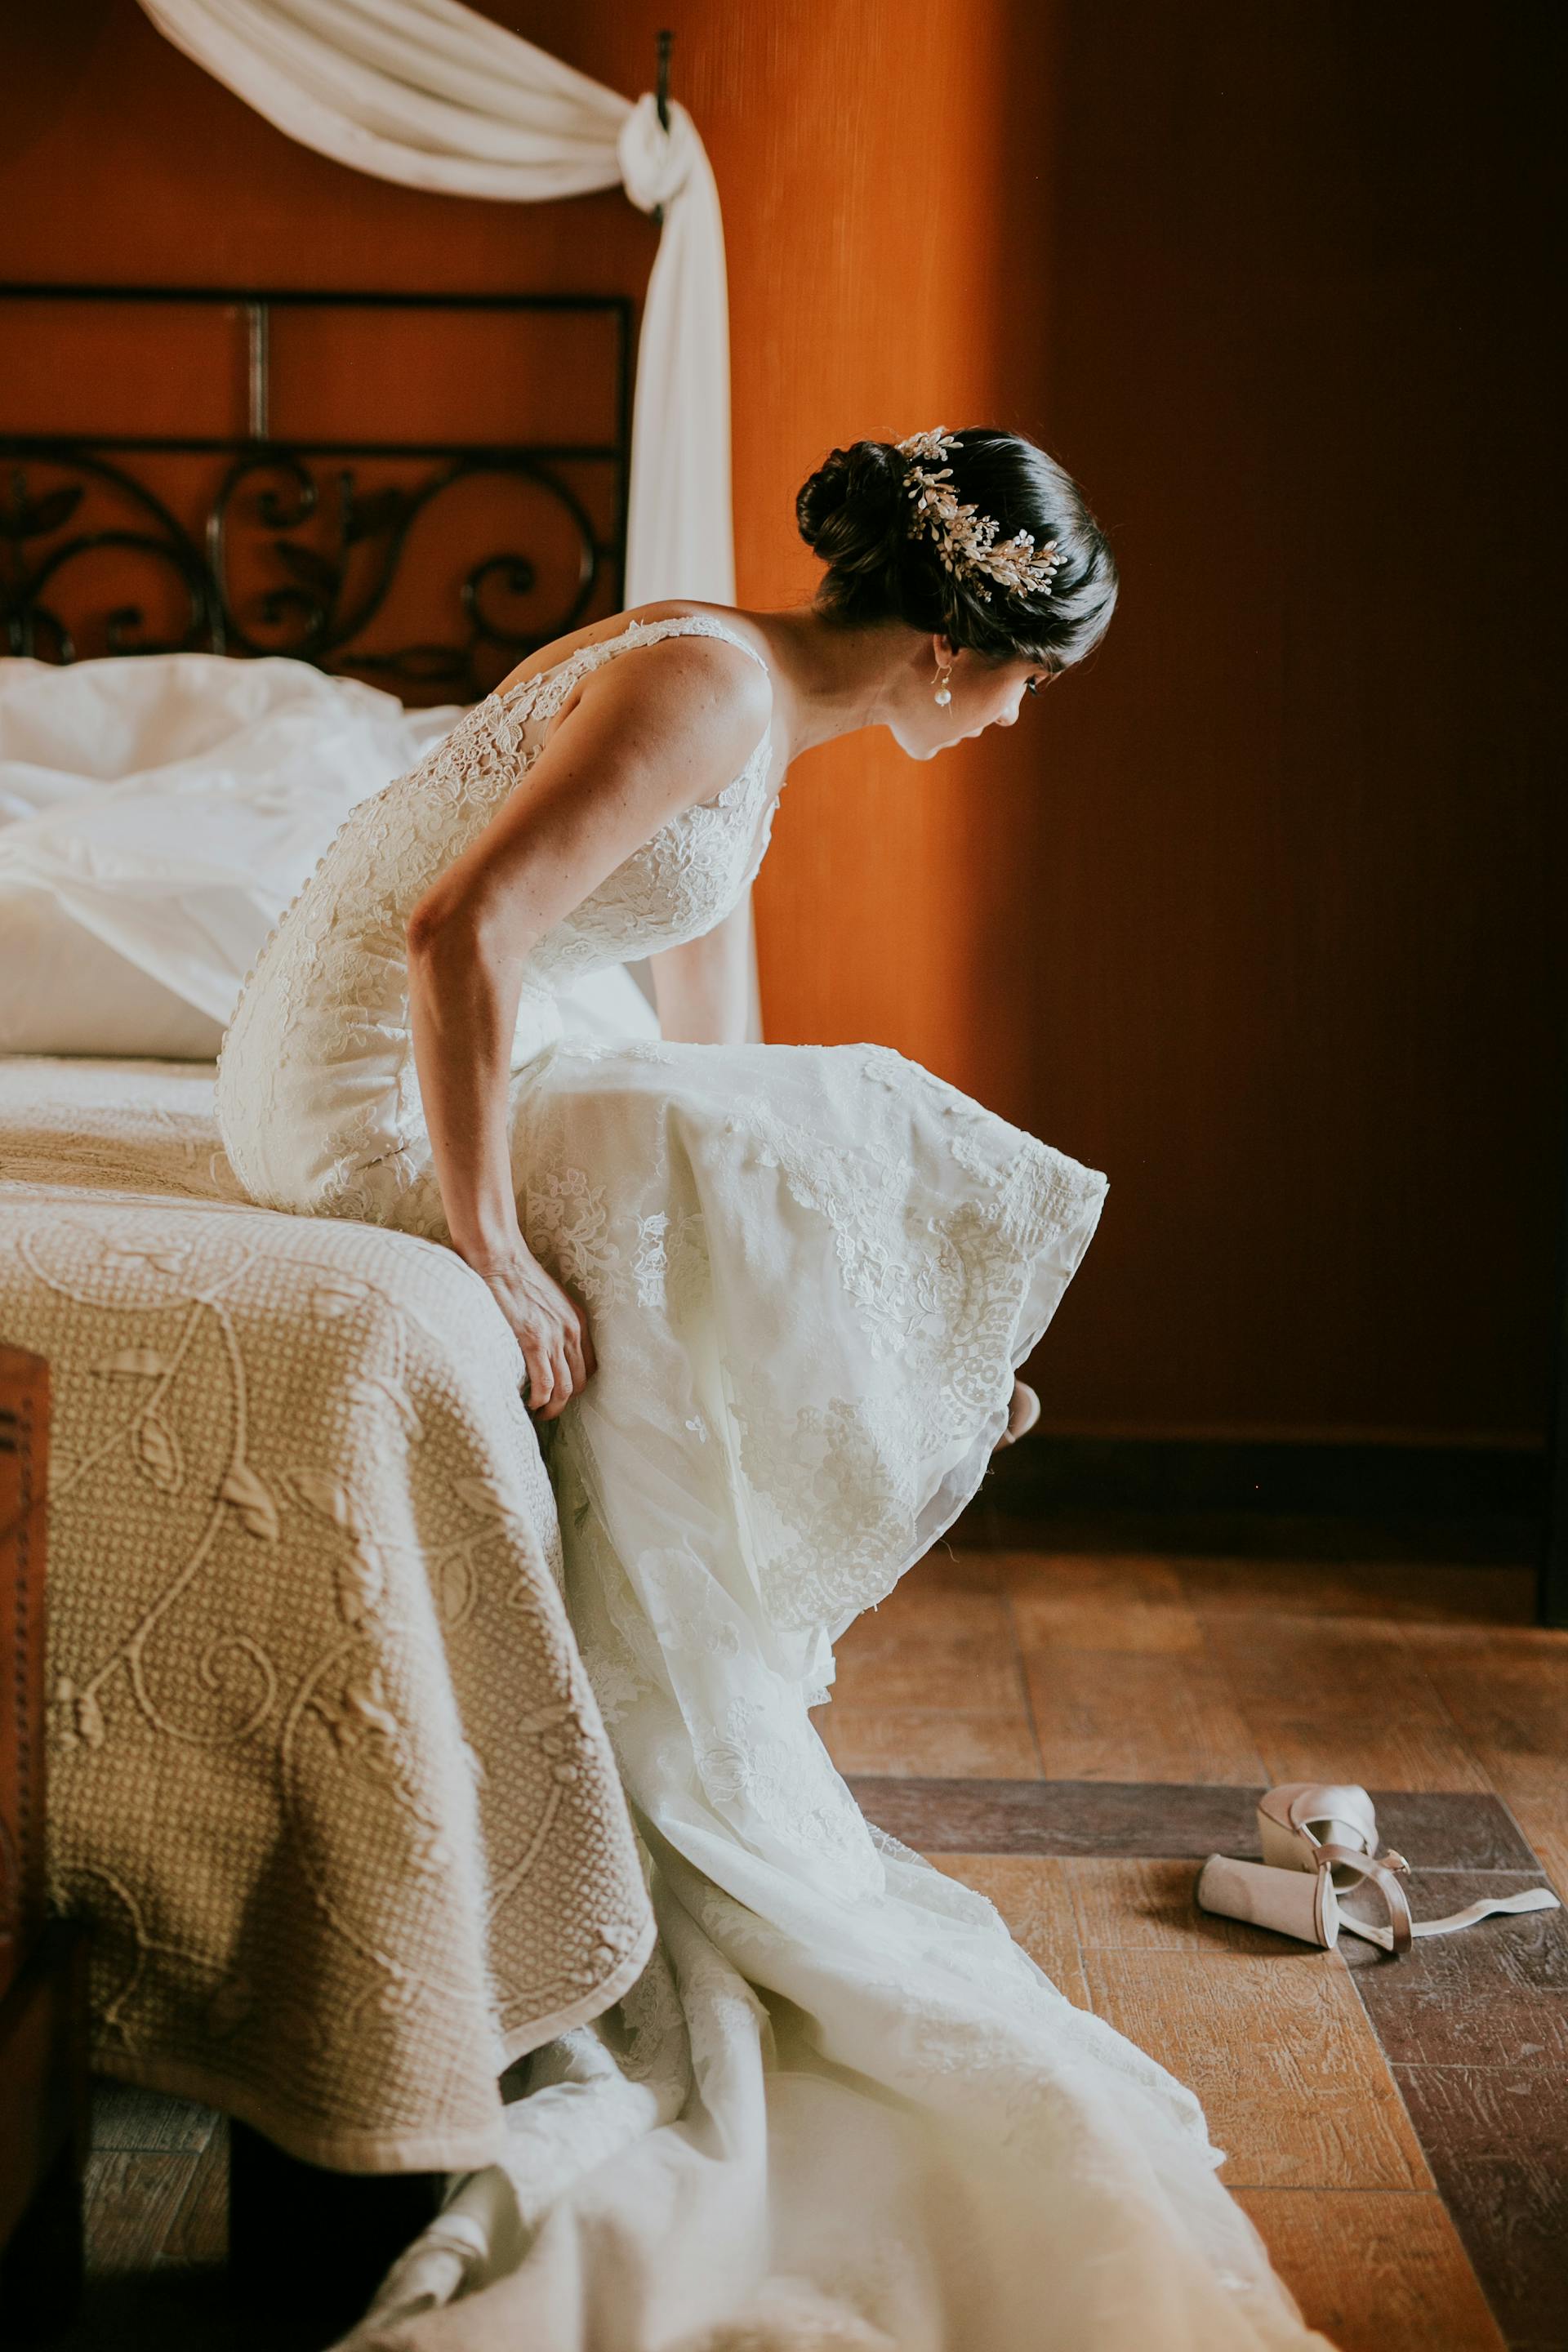 A bride sitting on a bed | Source: Pexels